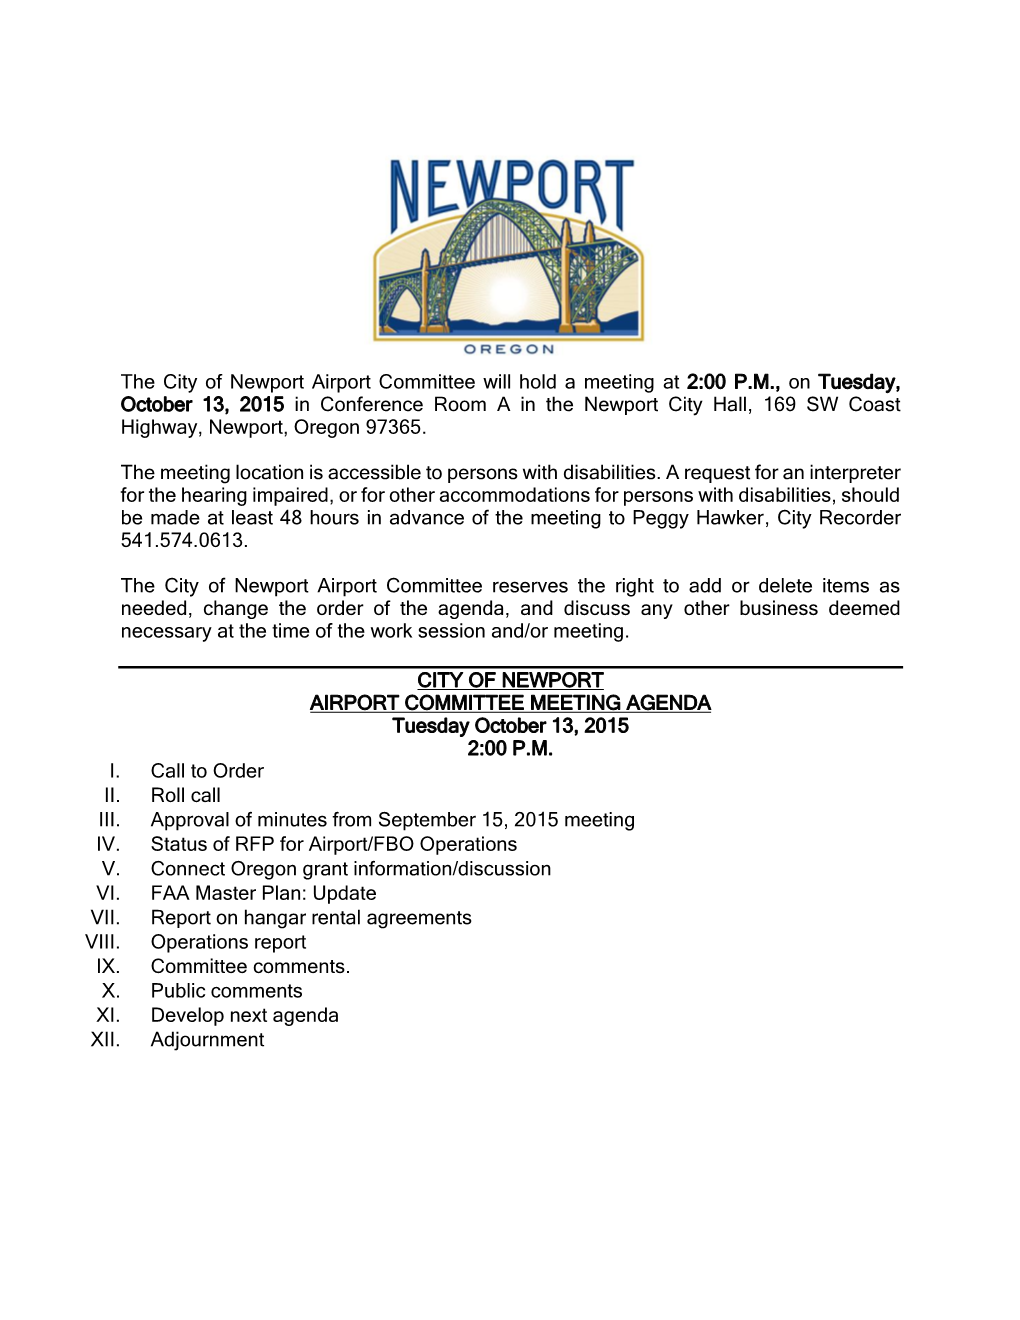 The City of Newport Airport Committee Will Hold a Meeting at 2:00 P.M., On